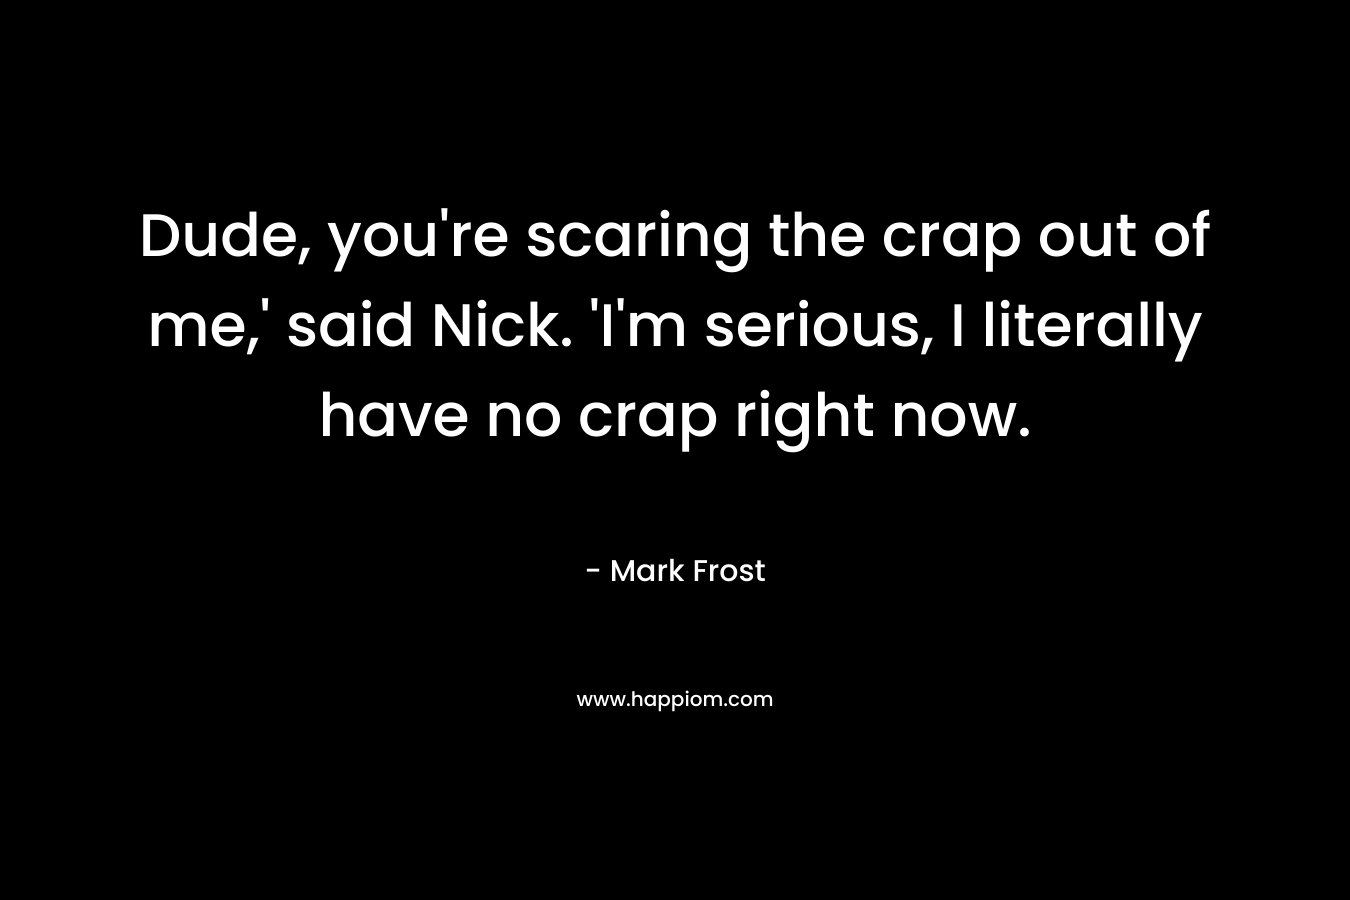 Dude, you’re scaring the crap out of me,’ said Nick. ‘I’m serious, I literally have no crap right now. – Mark Frost